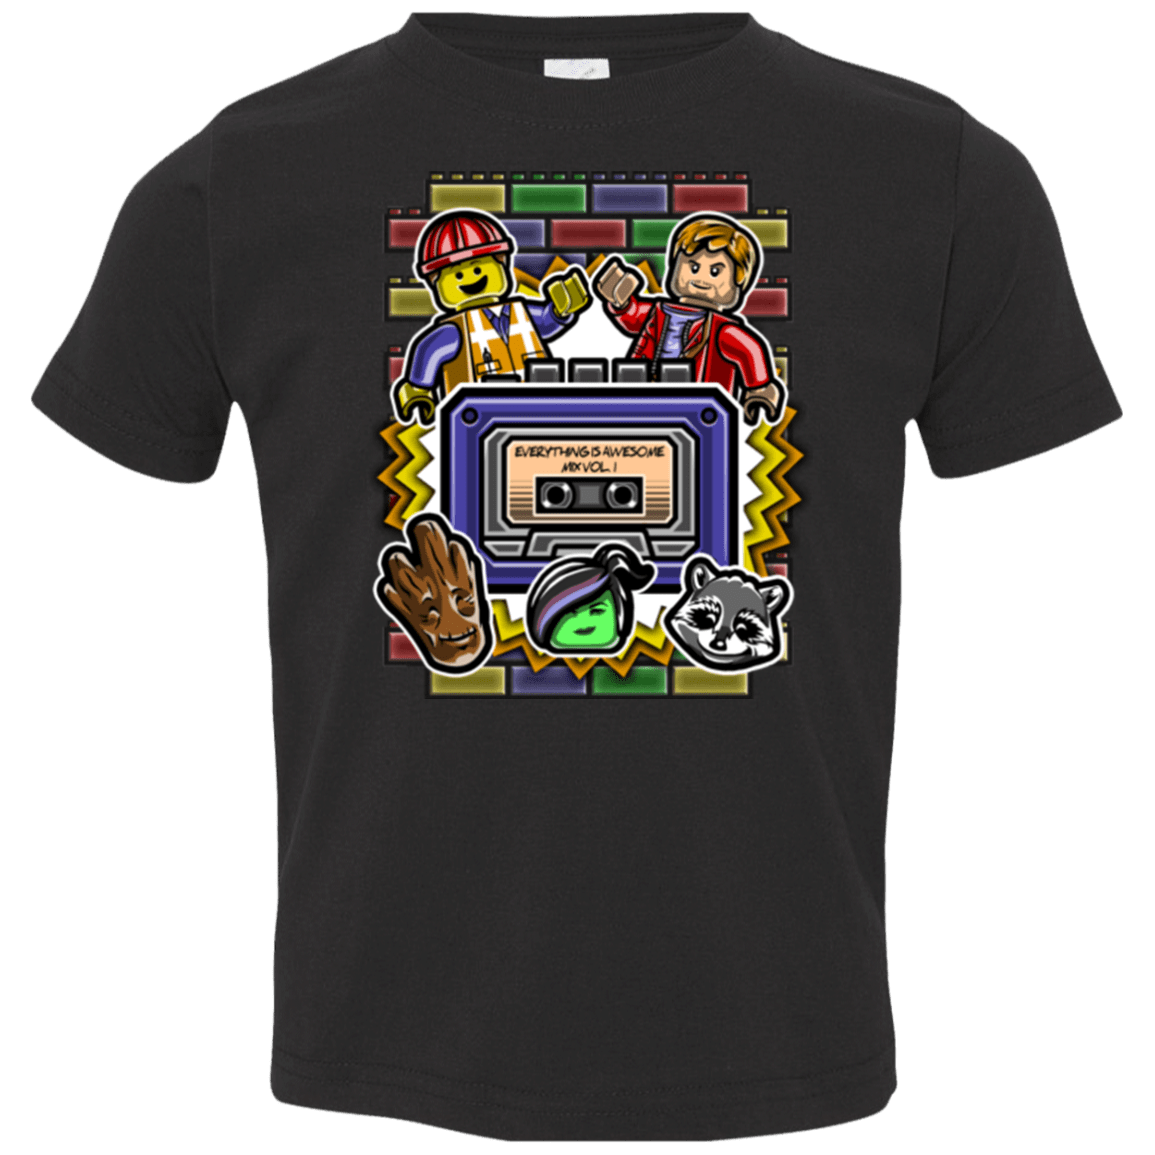 T-Shirts Black / 2T Everything is awesome mix Toddler Premium T-Shirt